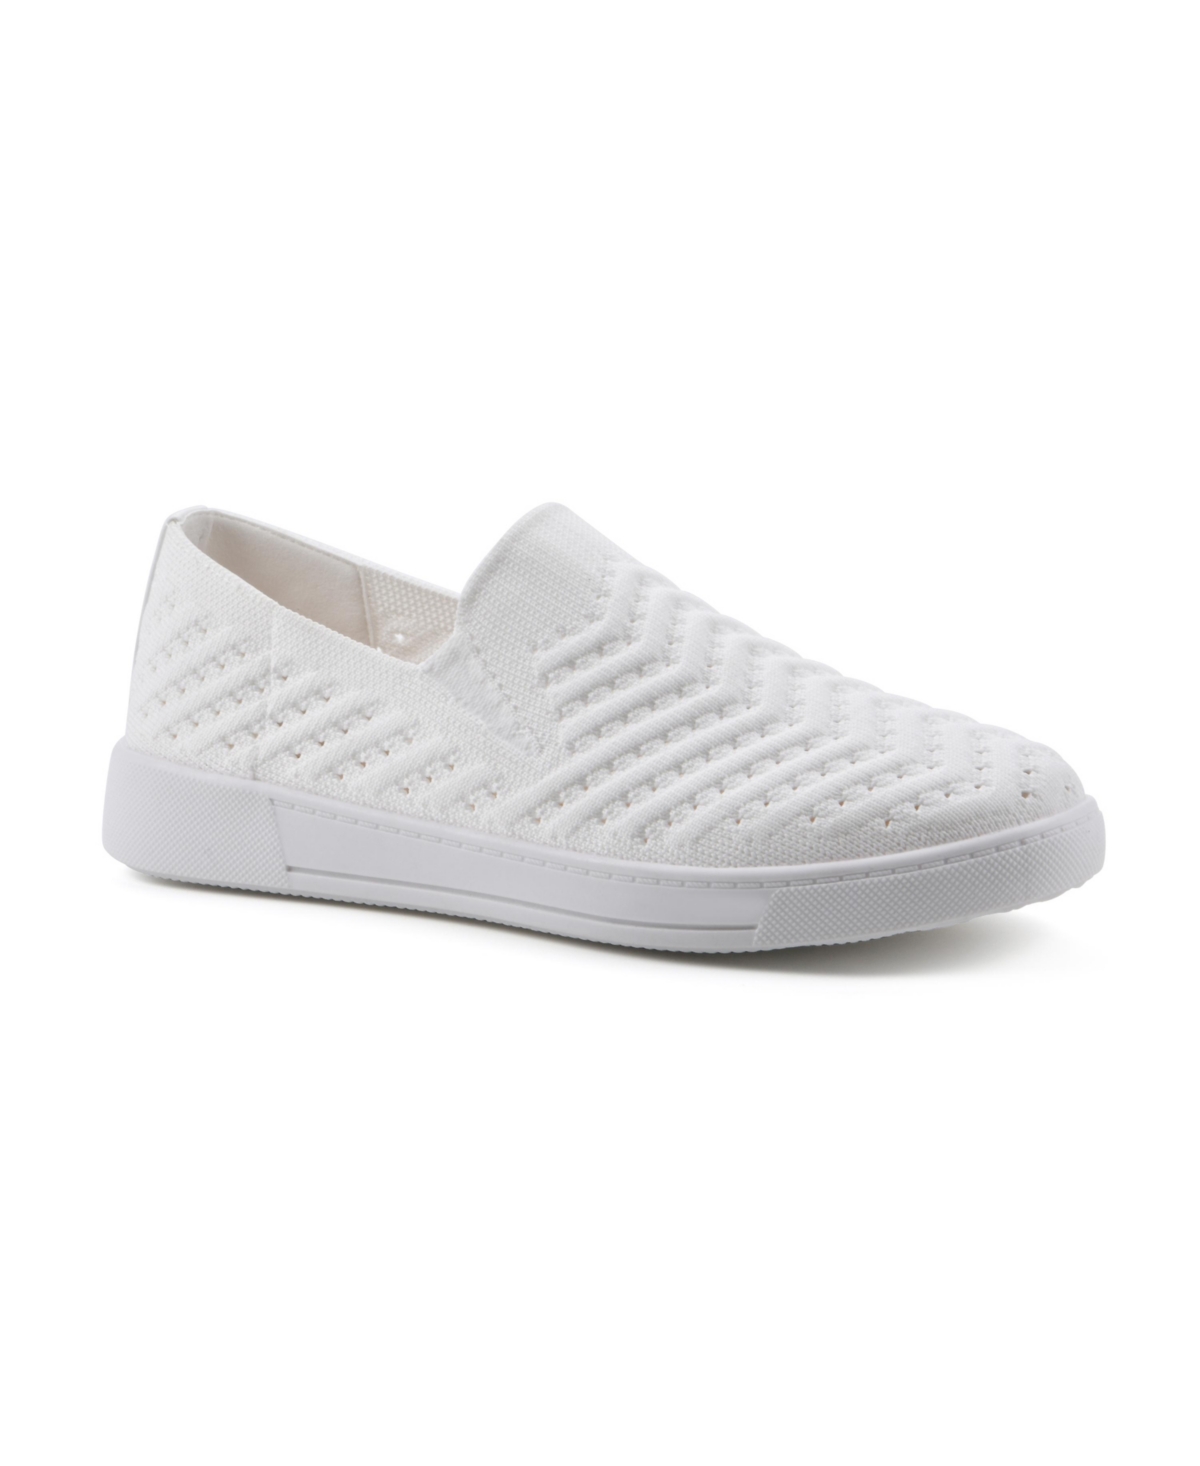 Women's Courage Slip On Sneakers - White, Fabric